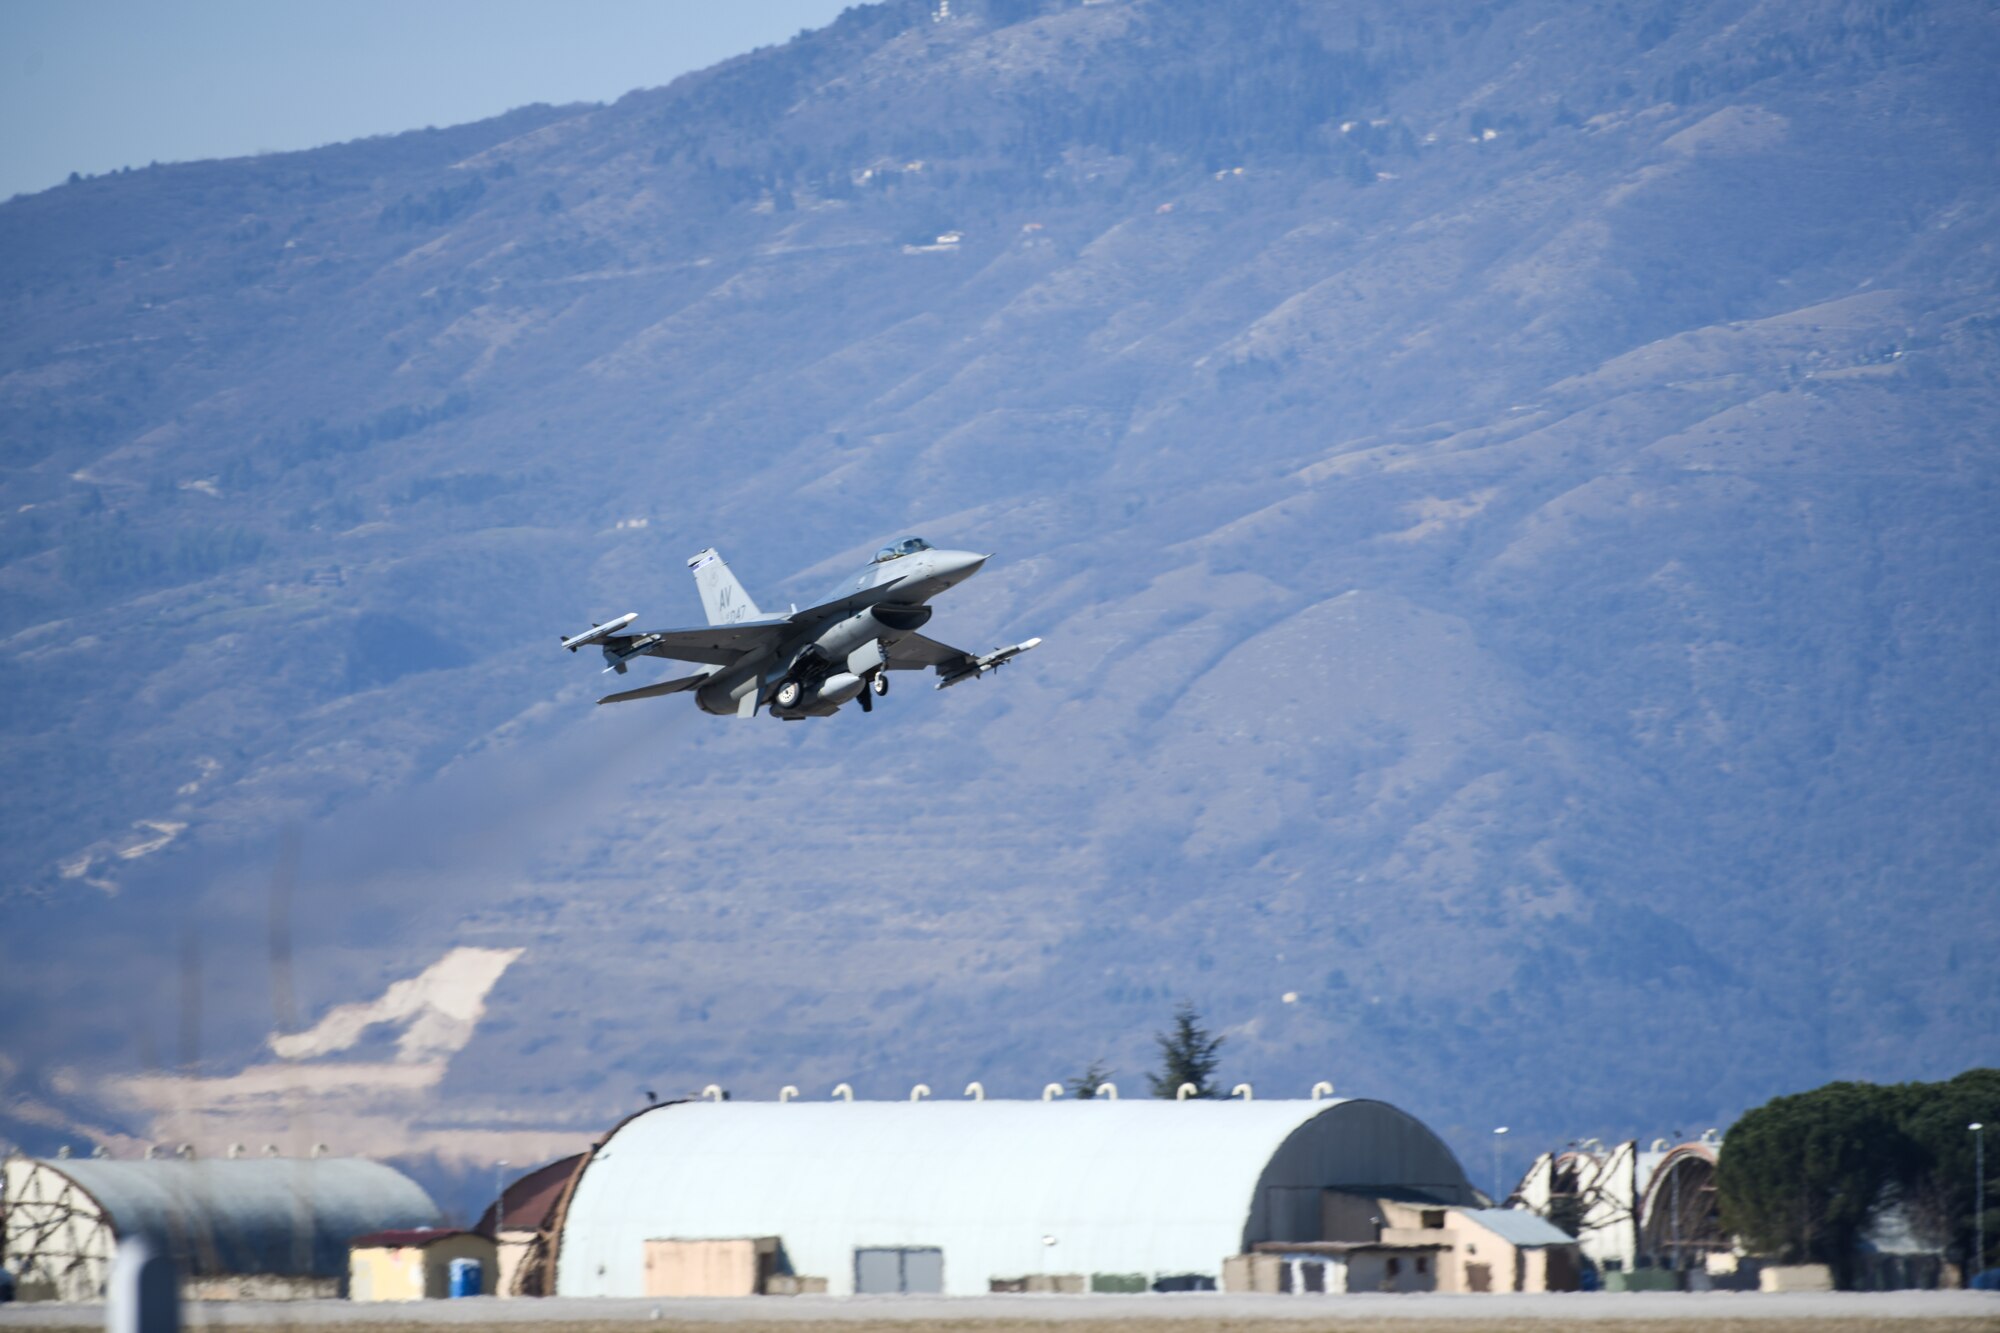 A U.S. Air Force F-16 Fighting Falcon from the 510th Fighter Squadron takes off at Aviano Air Base, Italy, March 16, 2020. The 510th FS provides combat airpower on demand to U.S. and NATO combatant commanders as well as the National Command Authority in order to meet National Security objectives.(U.S. Air Force photo by Airman 1st Class Ericka A. Woolever)